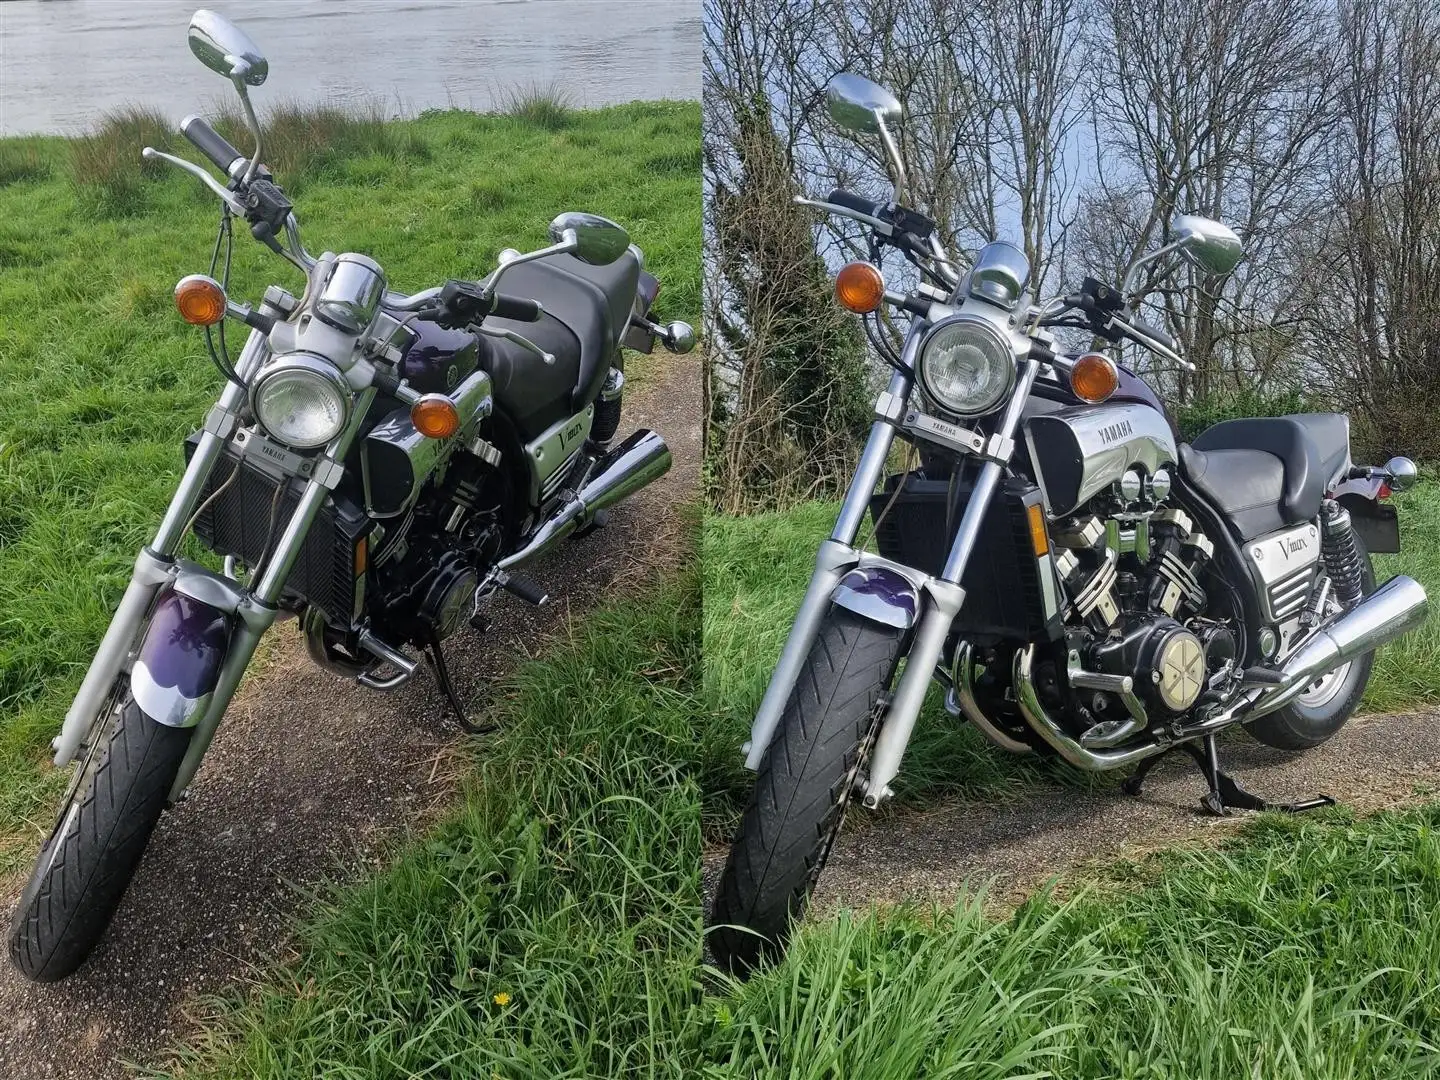 Yamaha Vmax 1200 cc in nette staat Lila - 2